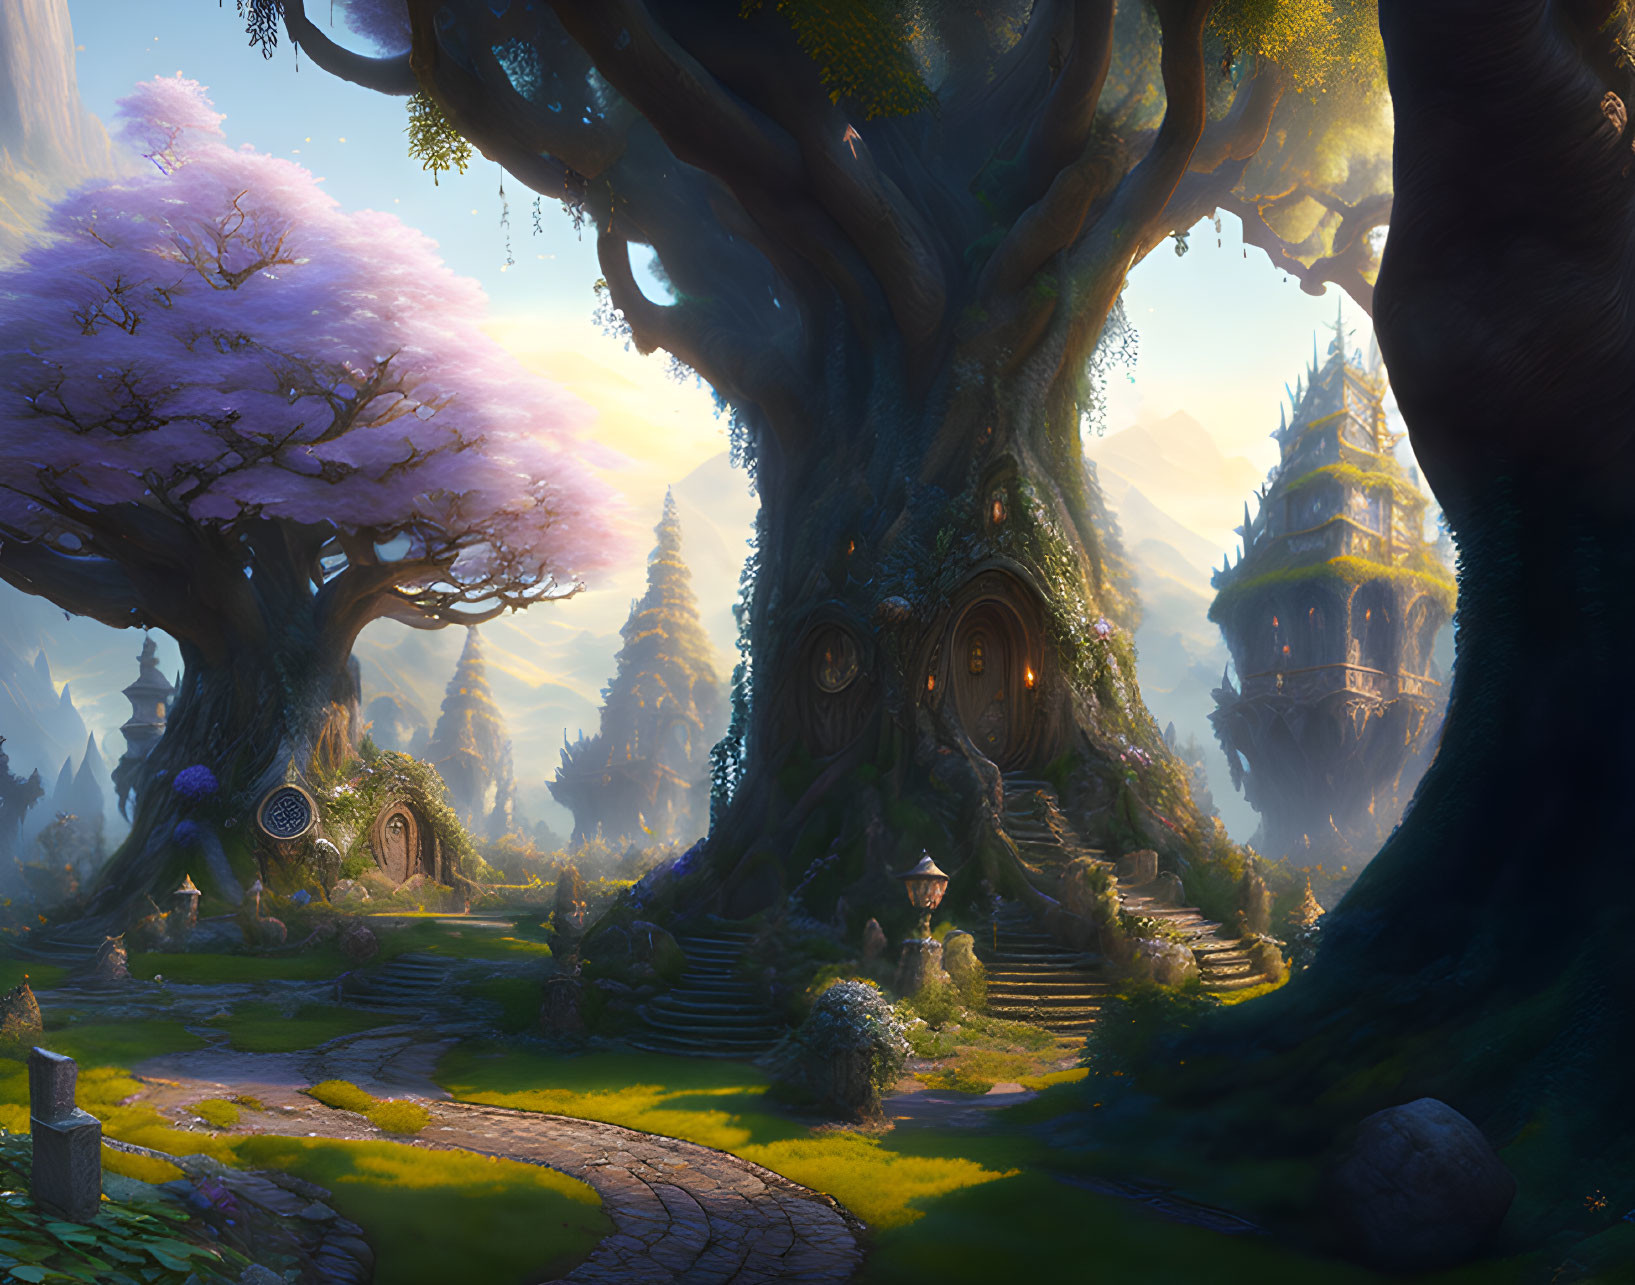 Fantasy landscape with grand tree, lush foliage, pink trees, and distant castle